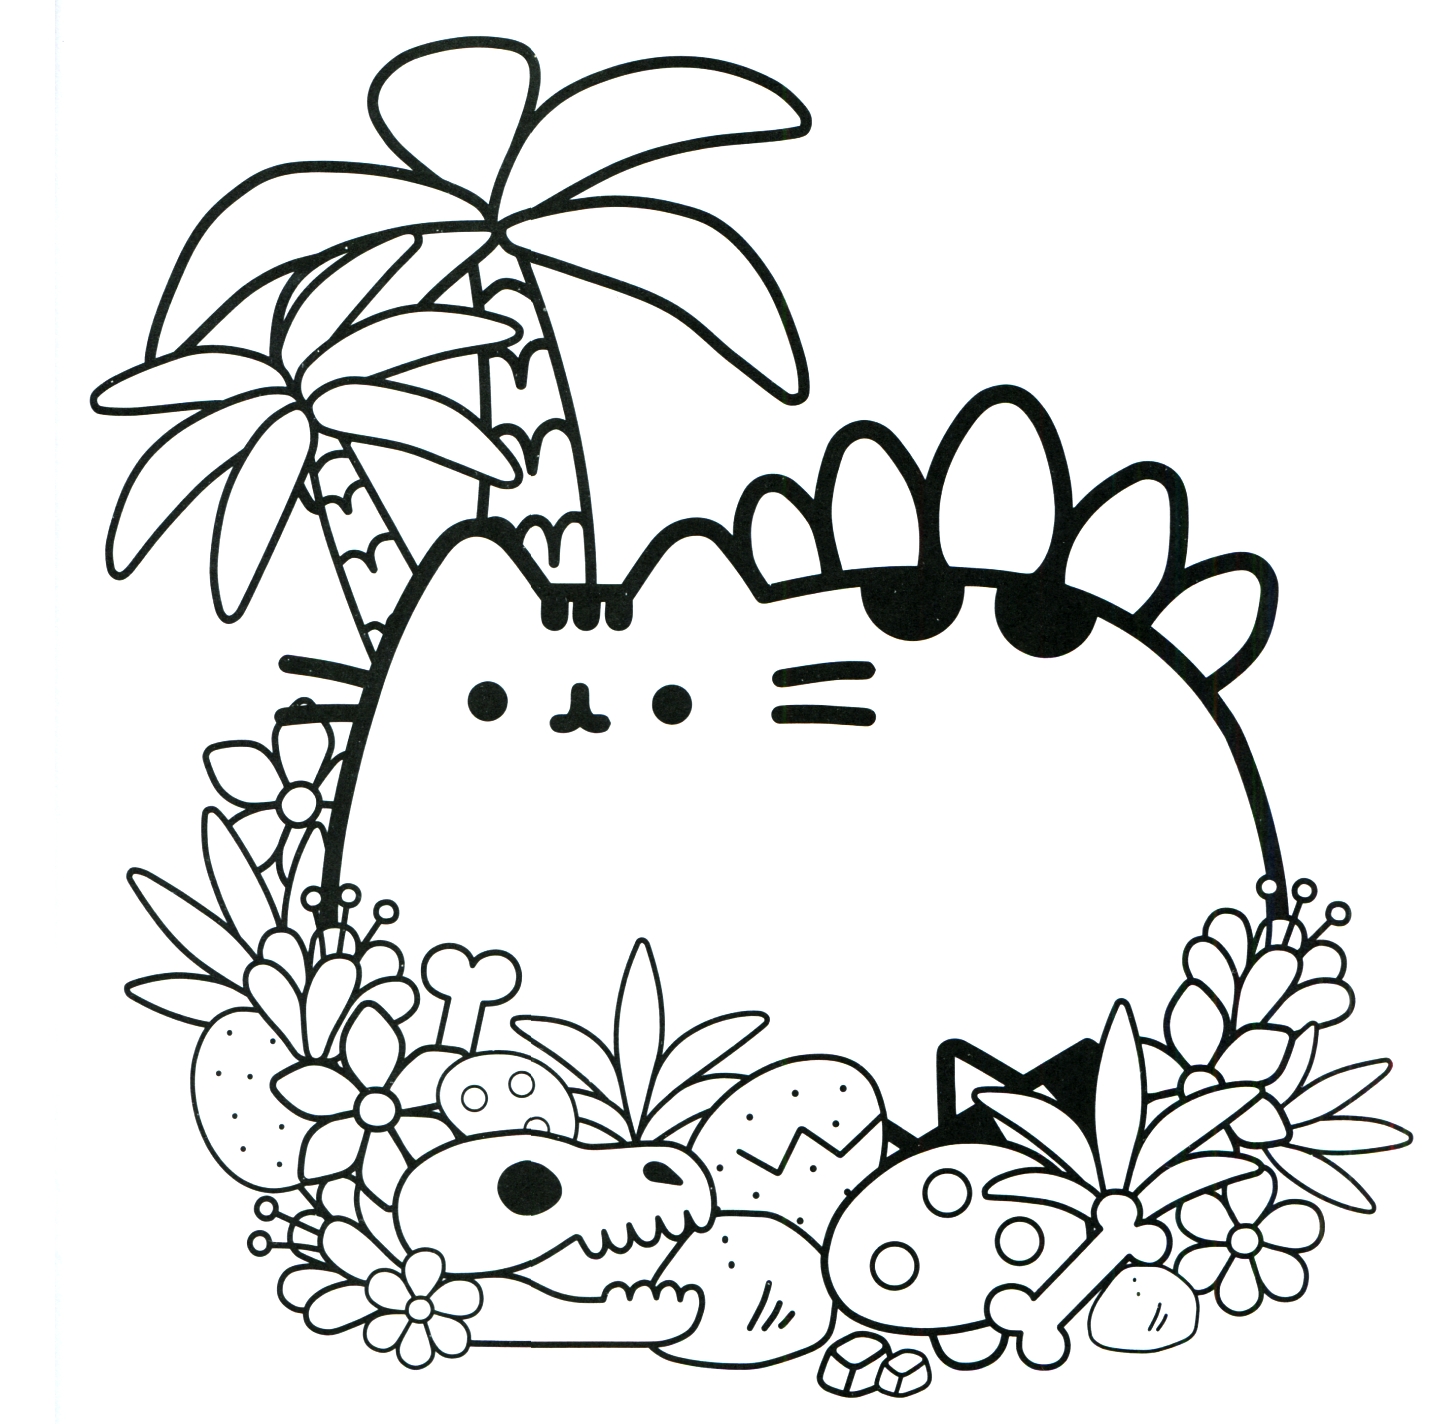 Pusheen Coloring Pages at GetColorings.com | Free printable colorings